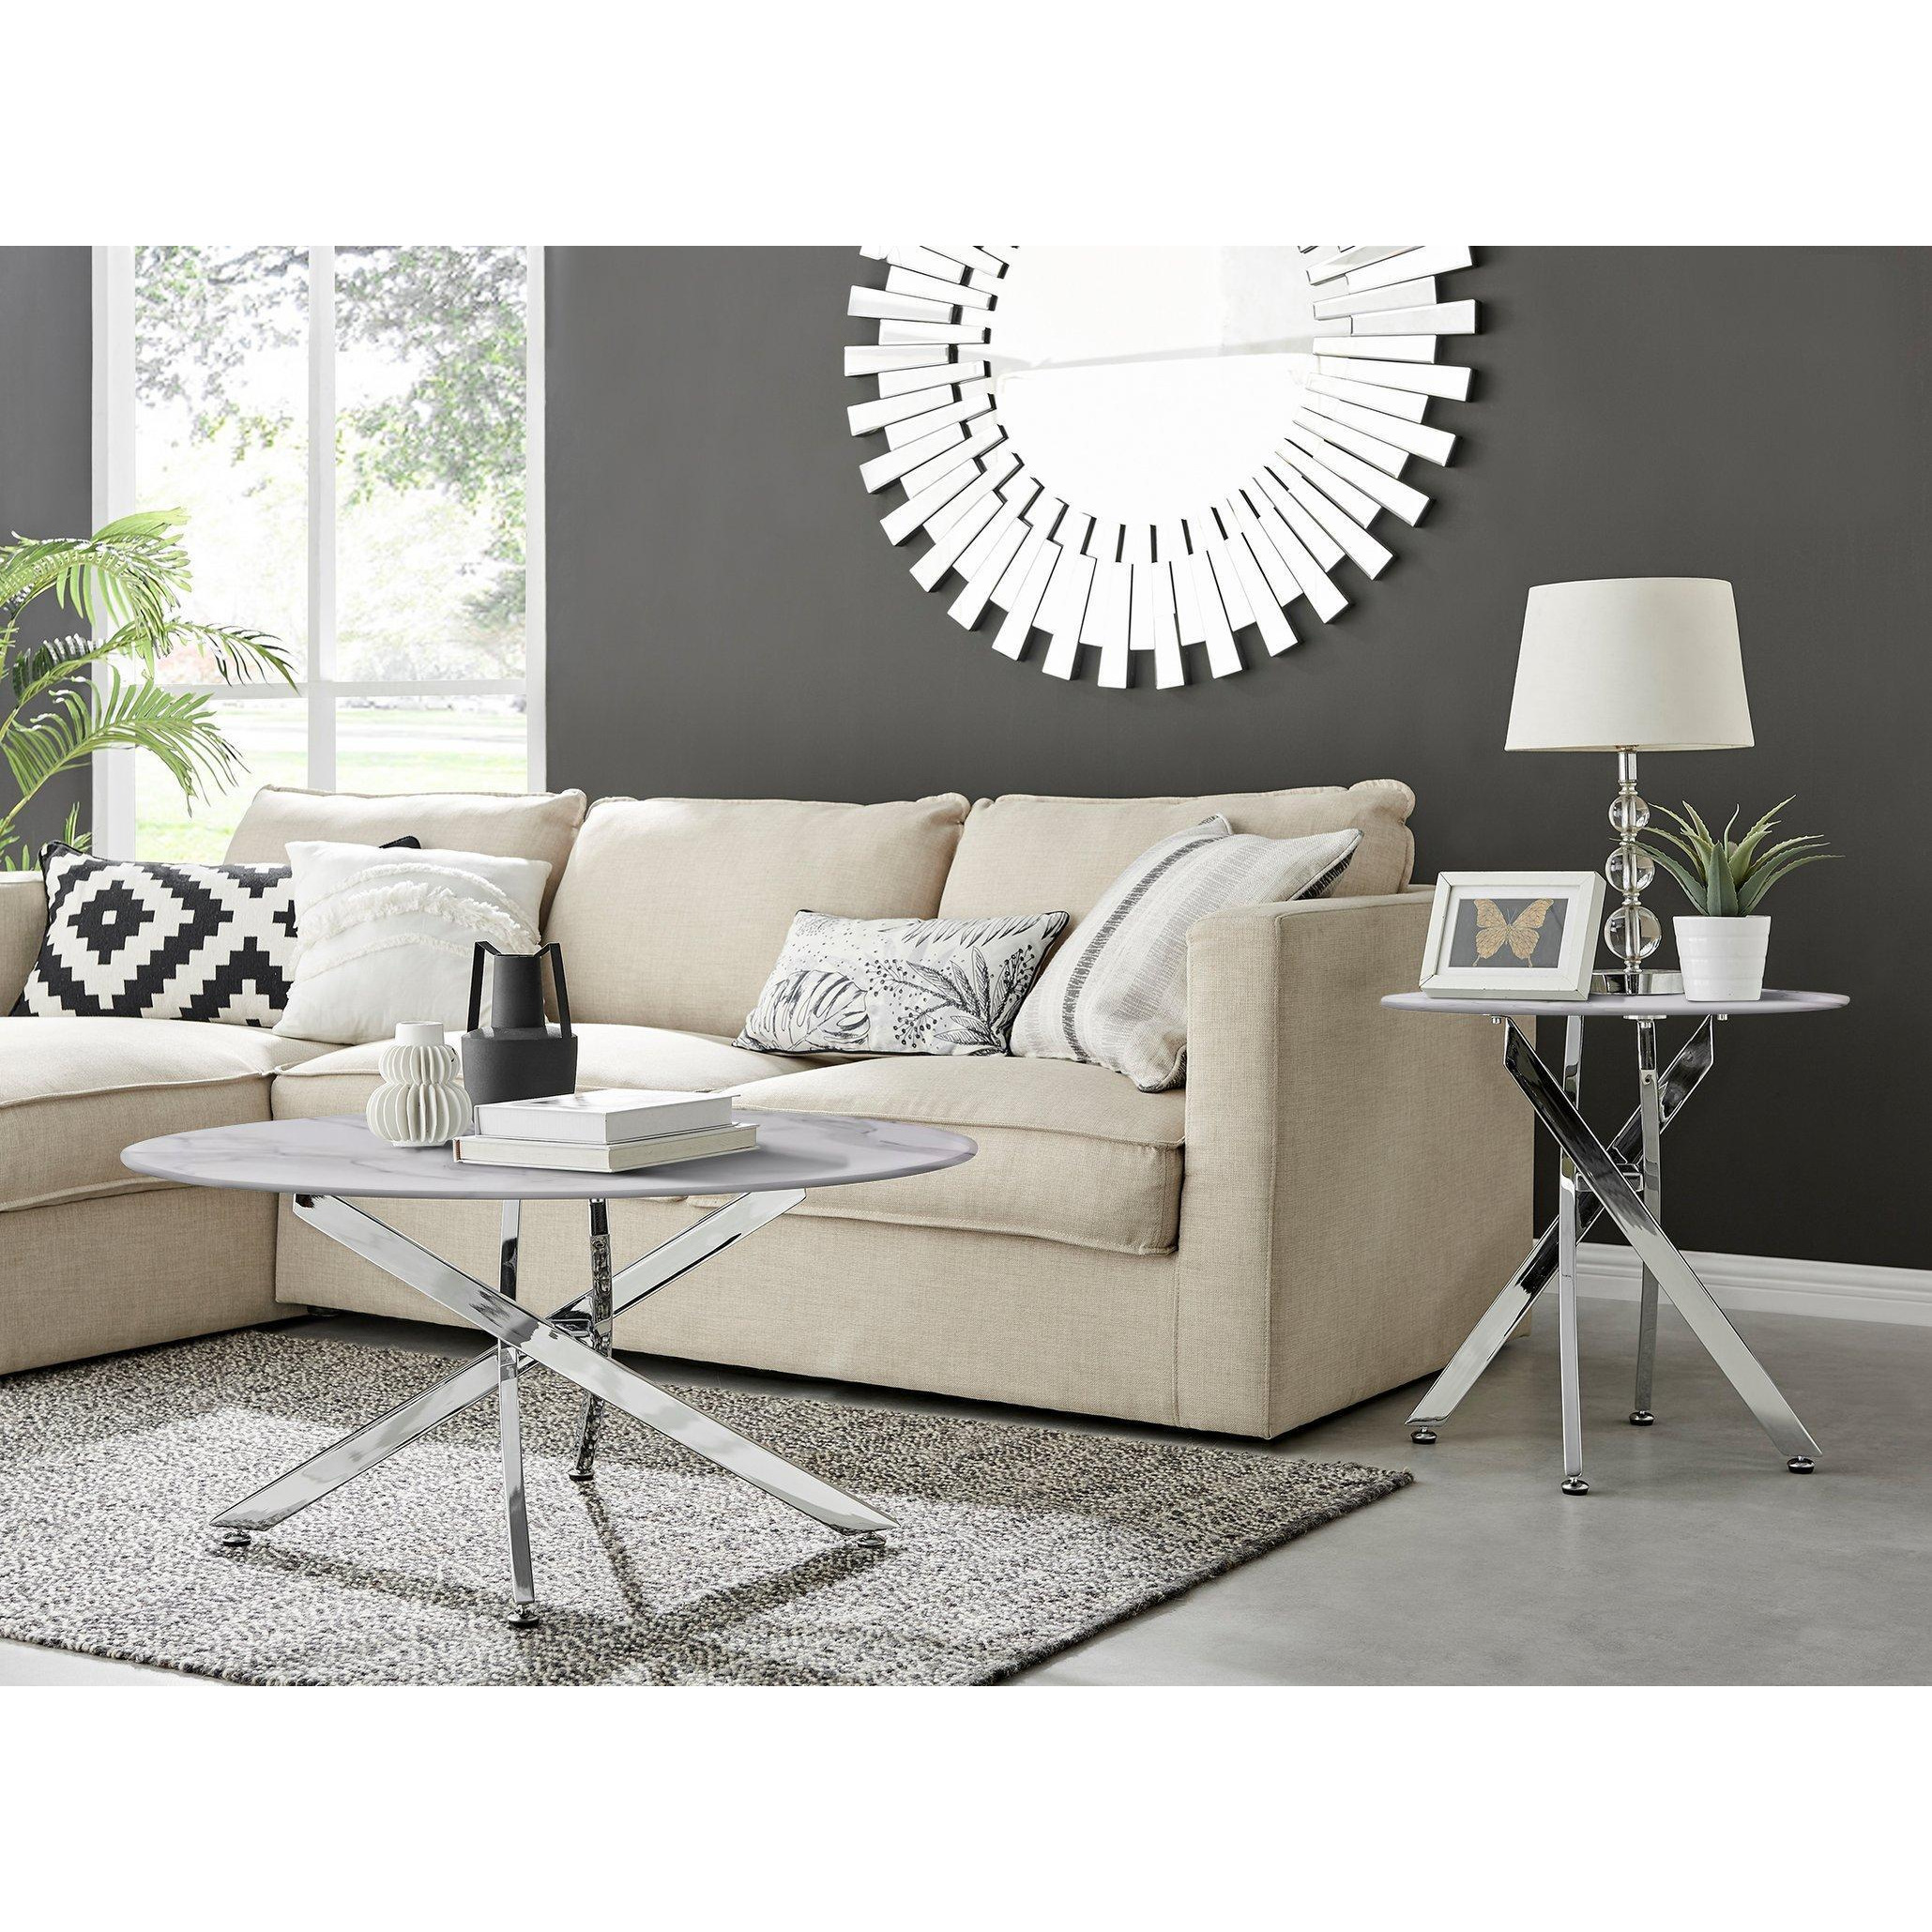 Novara Round Marble Effect Glass Top Coffee Table With Silver Metal Starburst Legs - image 1